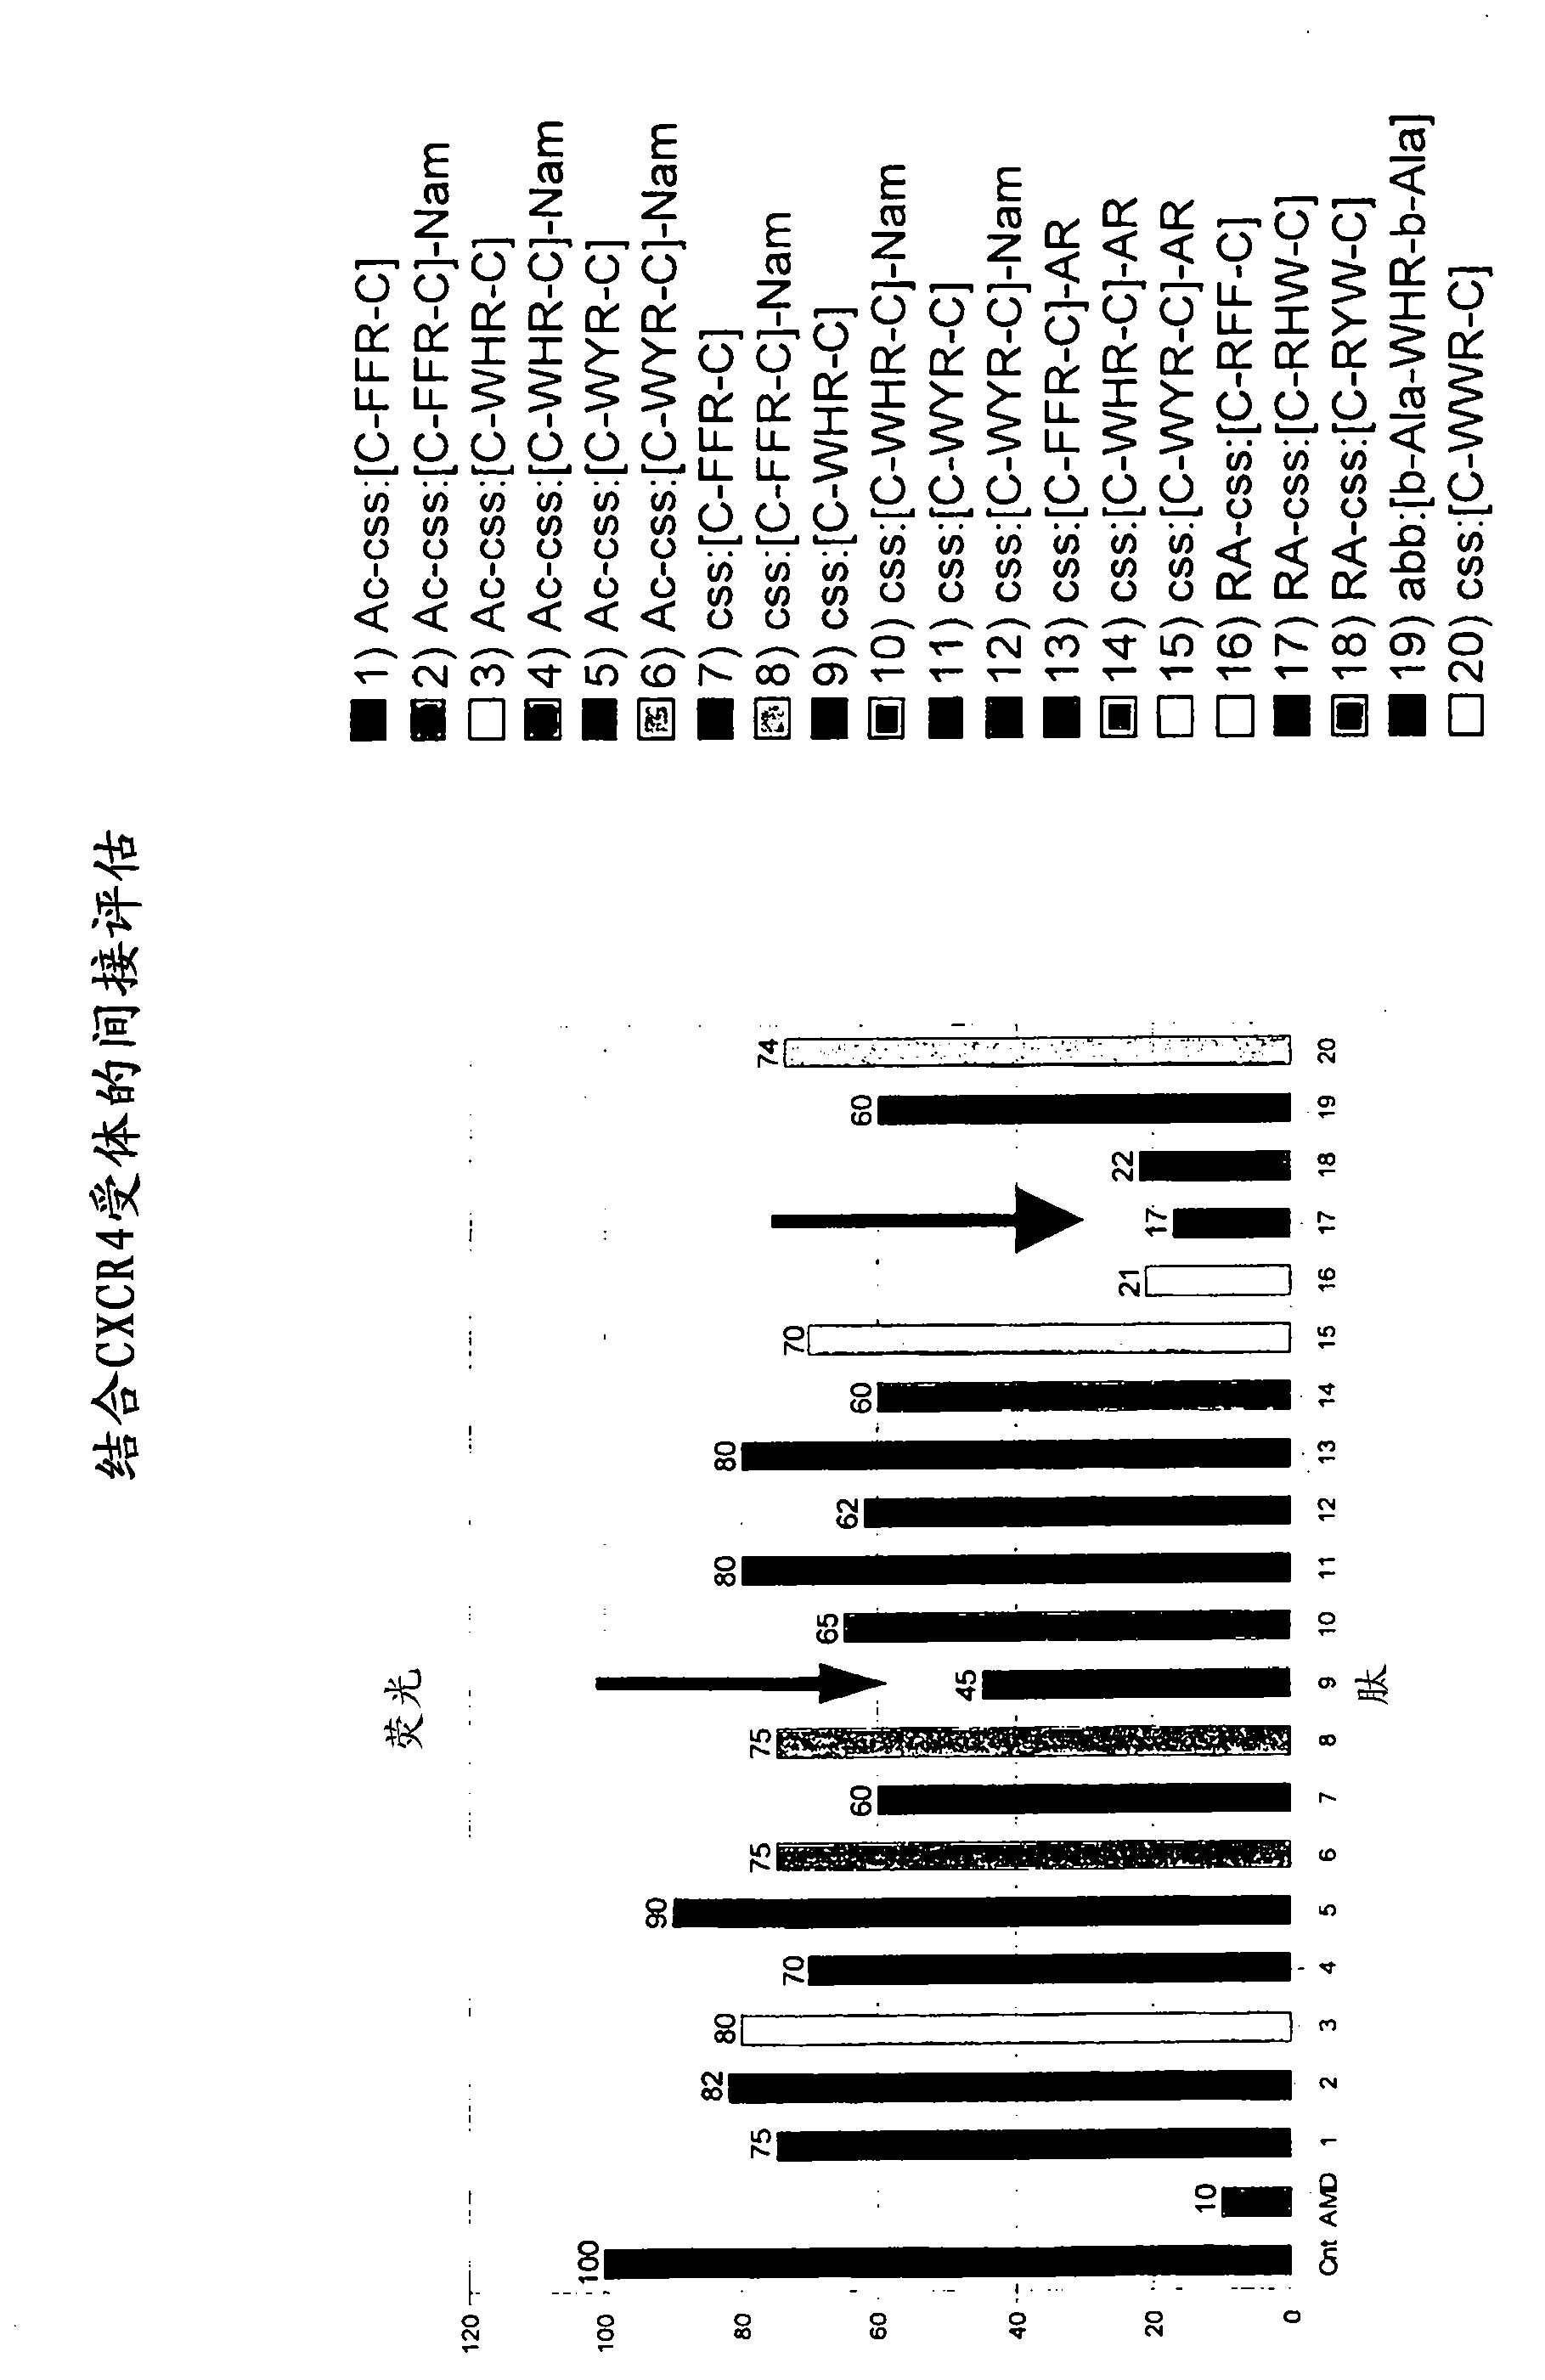 Cyclic peptides binding CXCR4 receptor and relative medical and diagnostic uses